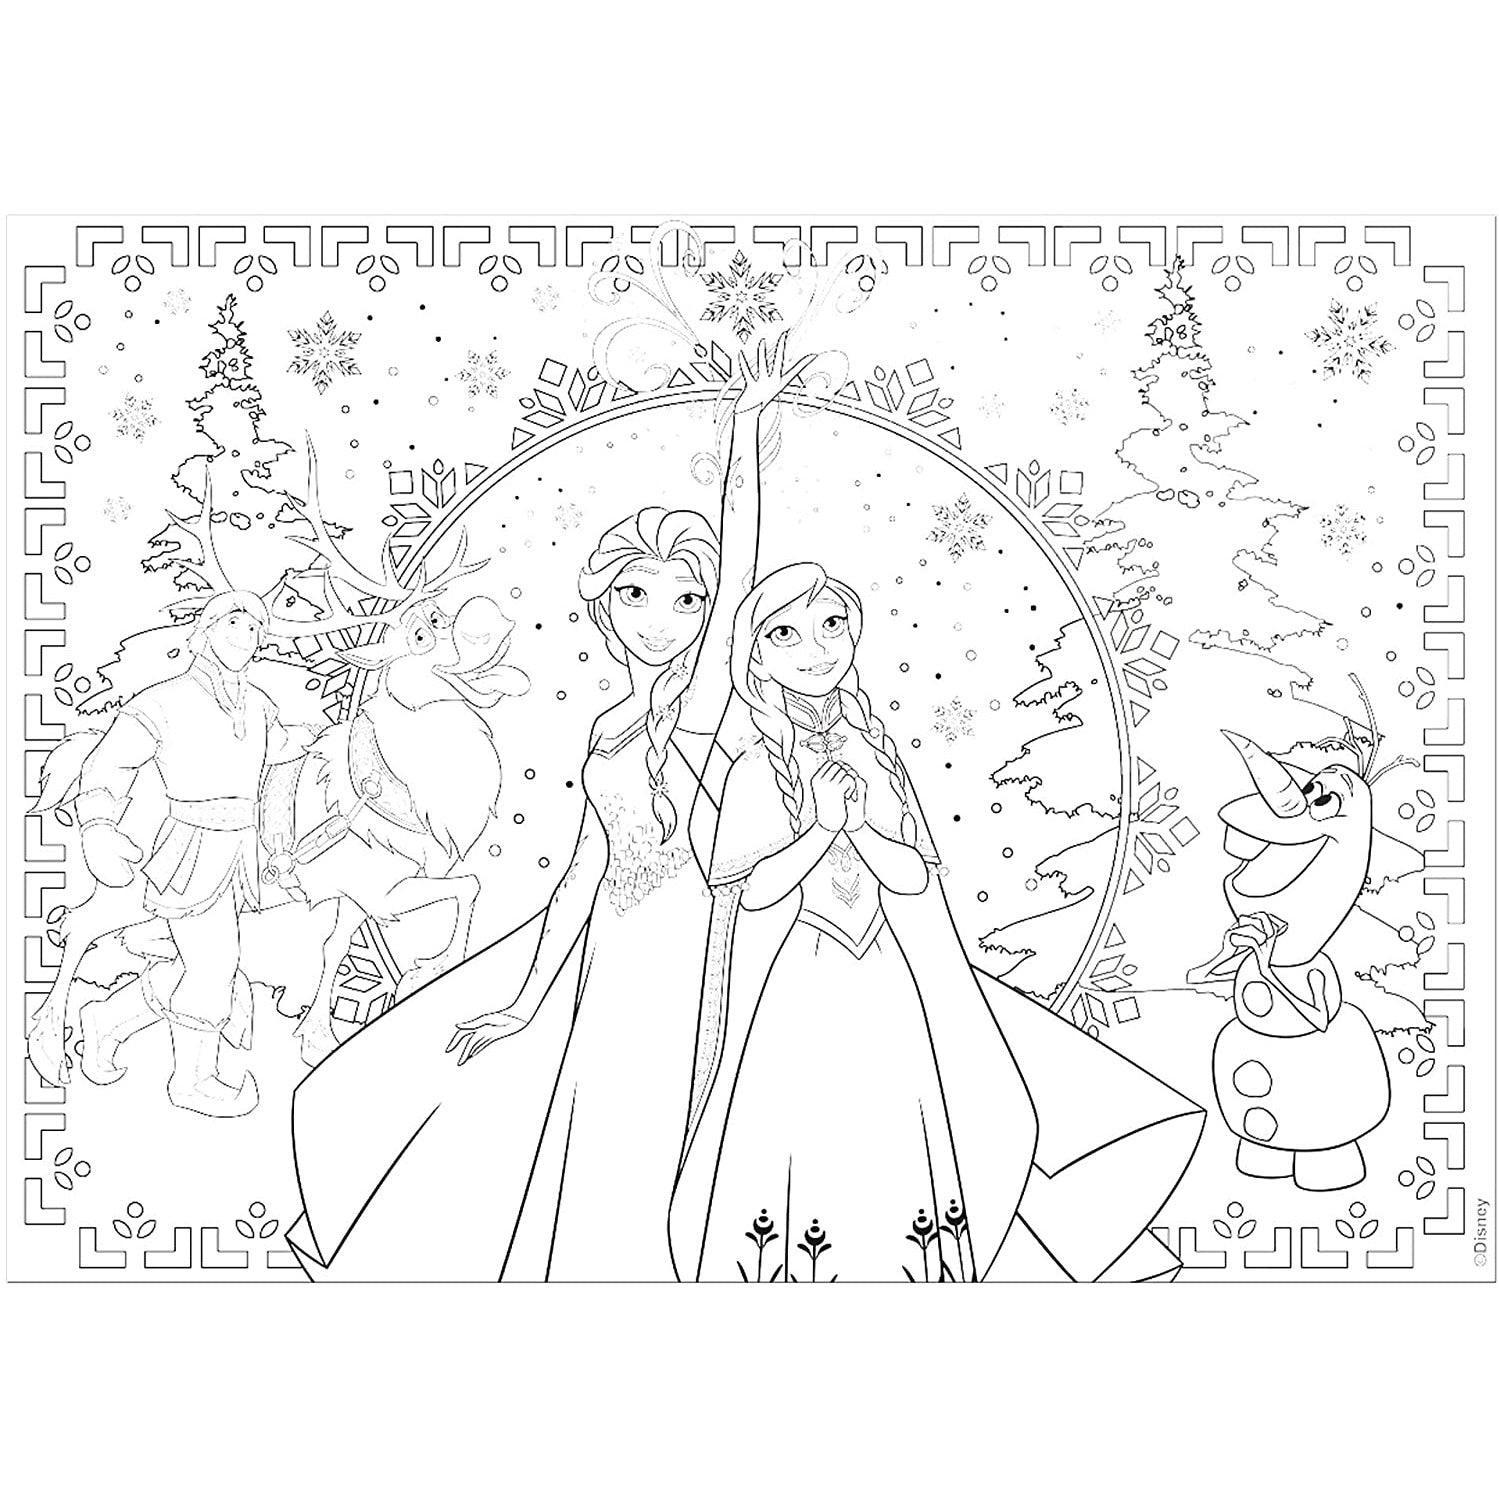 Lisciani 2-In-1 Disney Frozen Double Side Puzzle For Girls – 250 Pieces - Ourkids - Lisciani